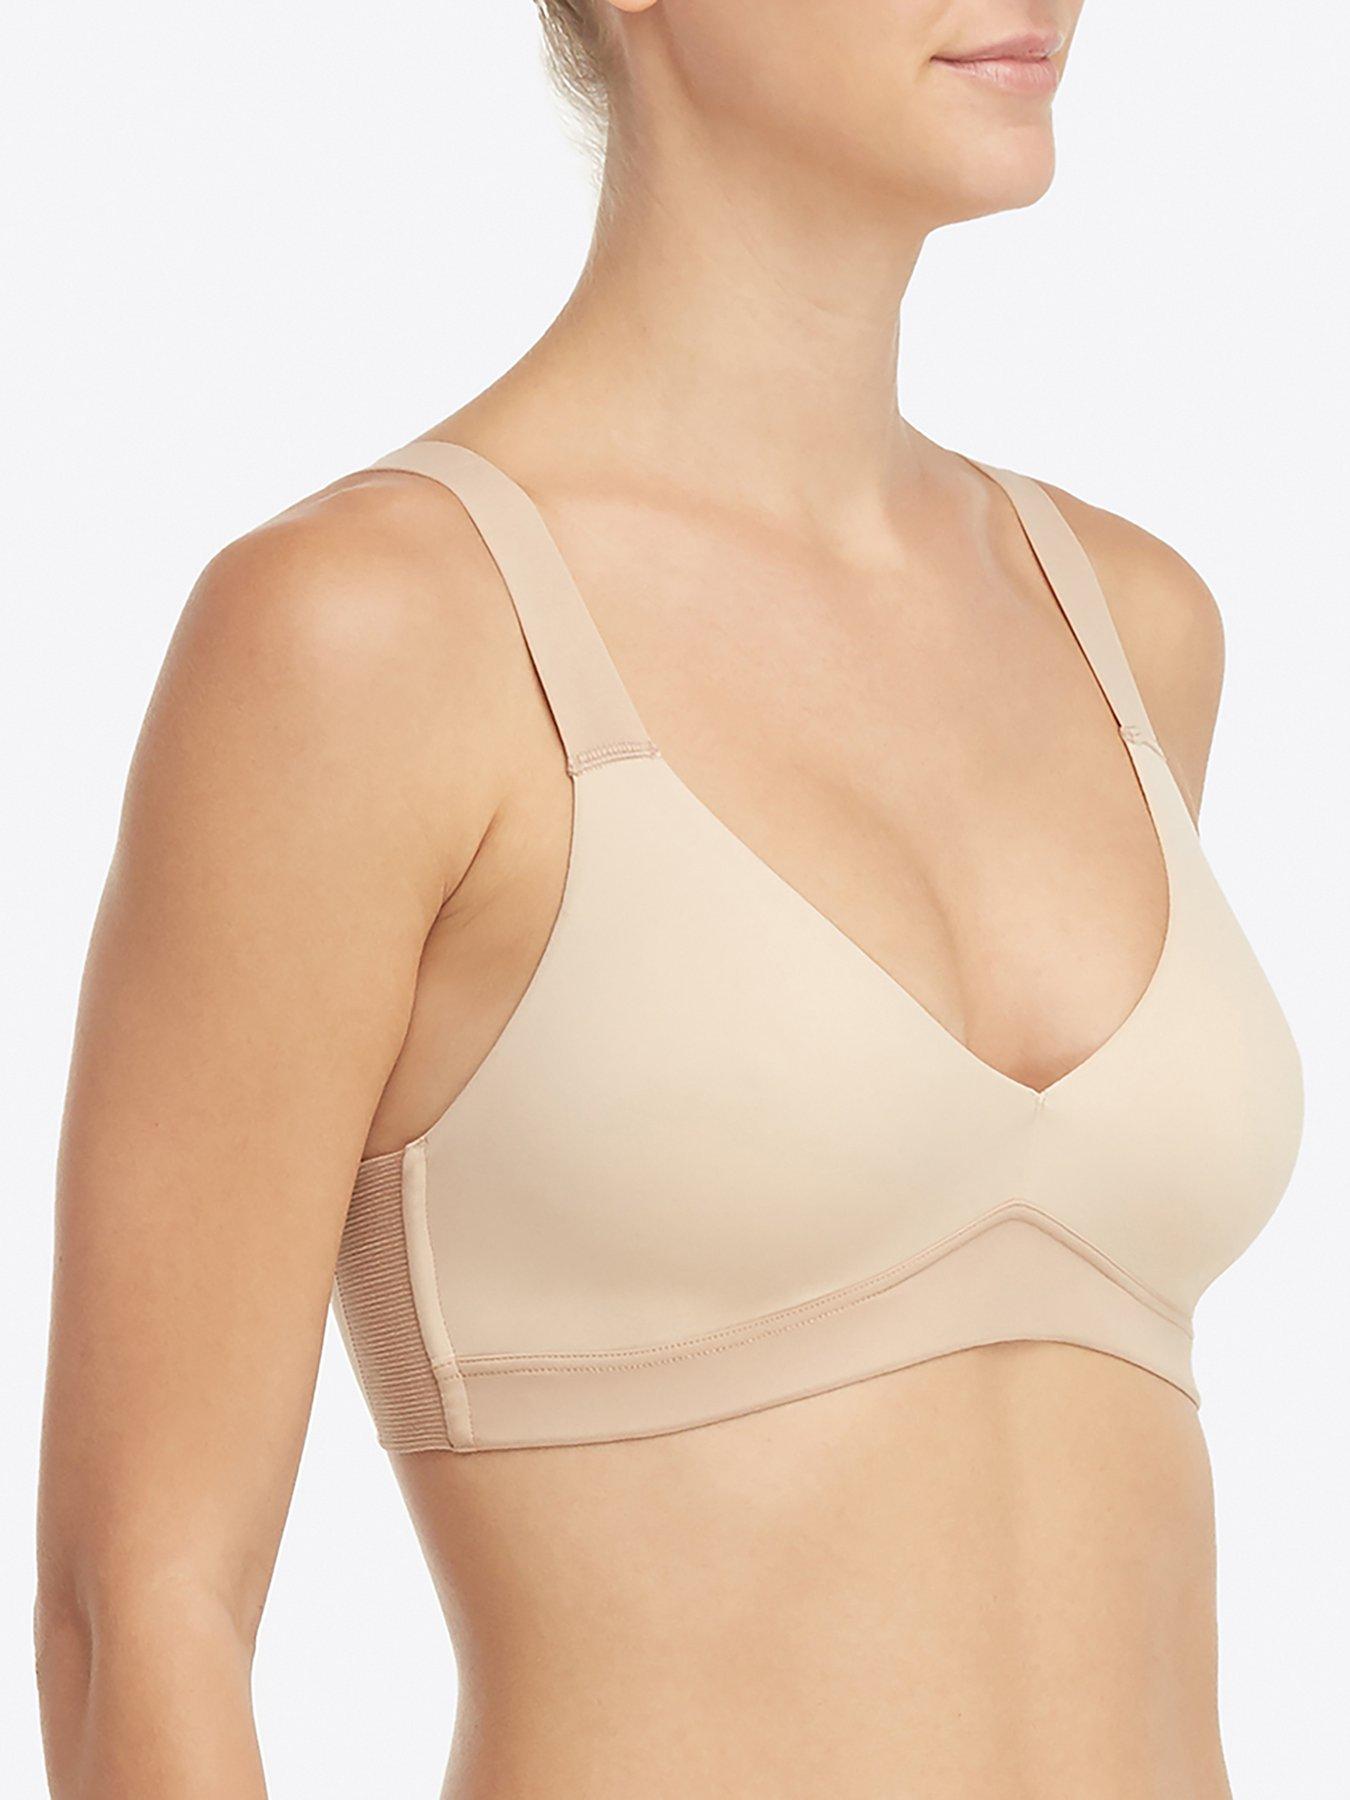 Quick way to find the balance point of your underwire — Van